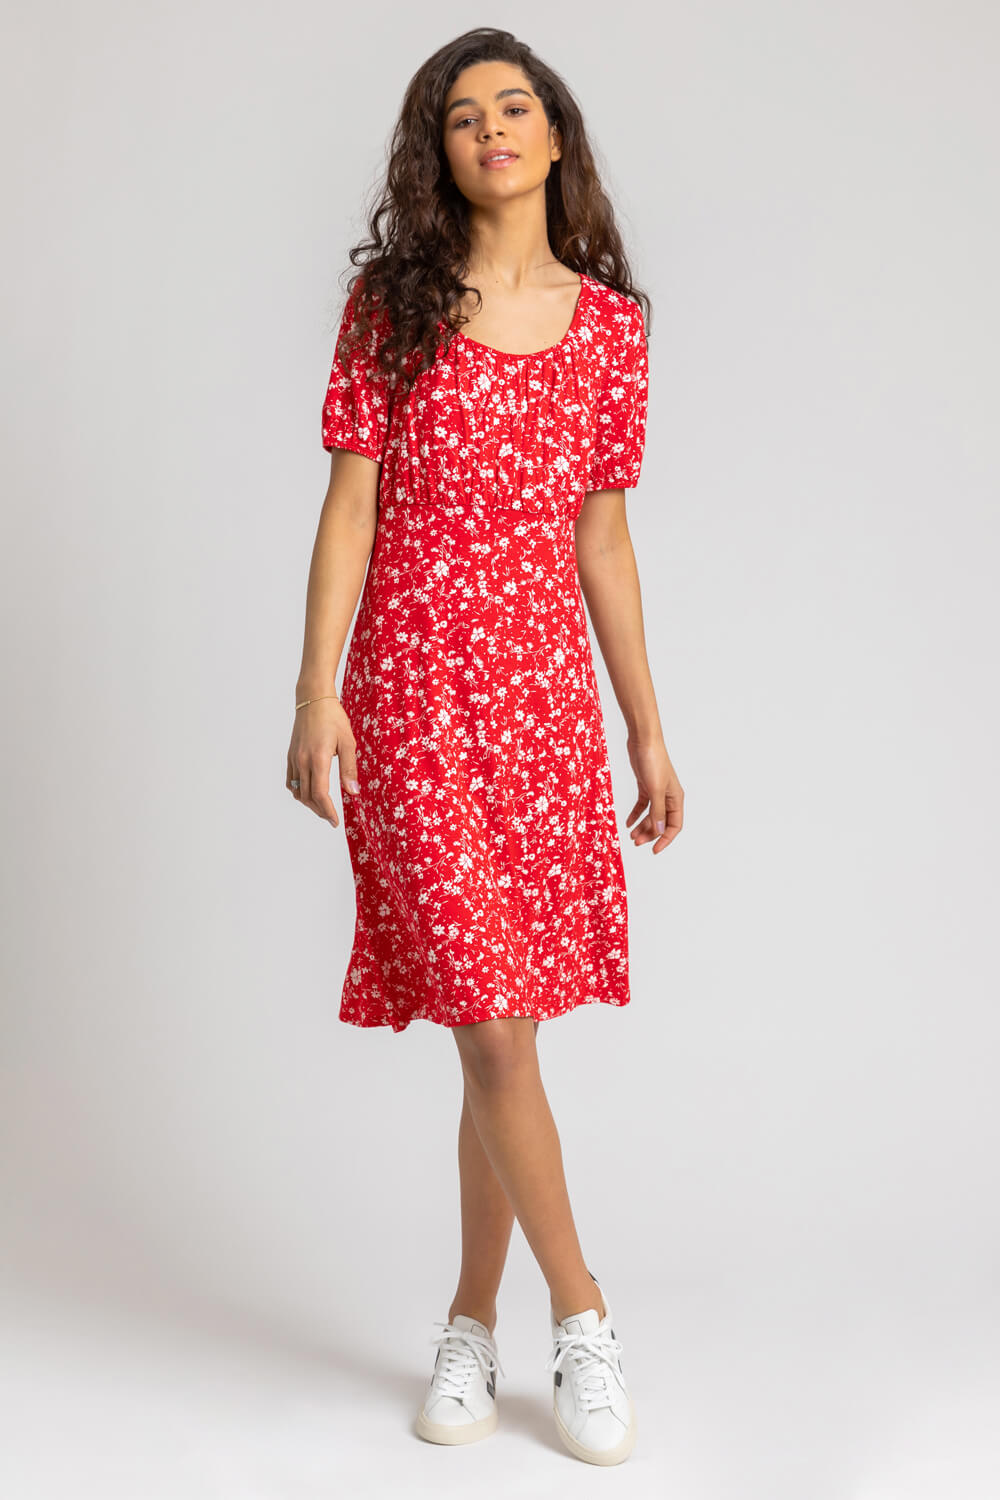 Red Stretch Floral Print Fit & Flare Dress, Image 3 of 5